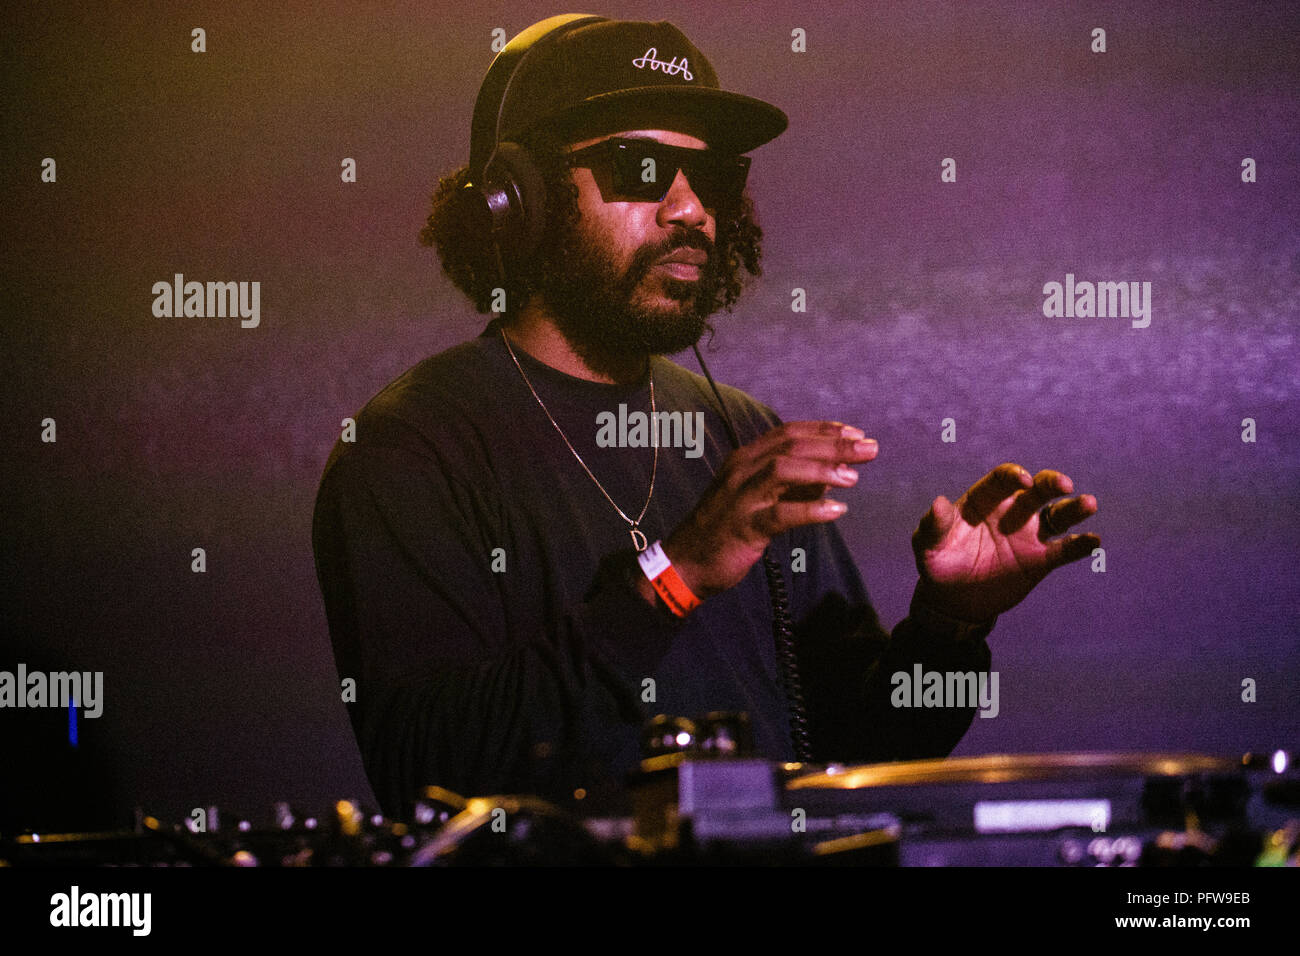 Denmark, Copenhagen - August 9, 2018. The American vocalist, musician and  producer Dam-Funk performs a live